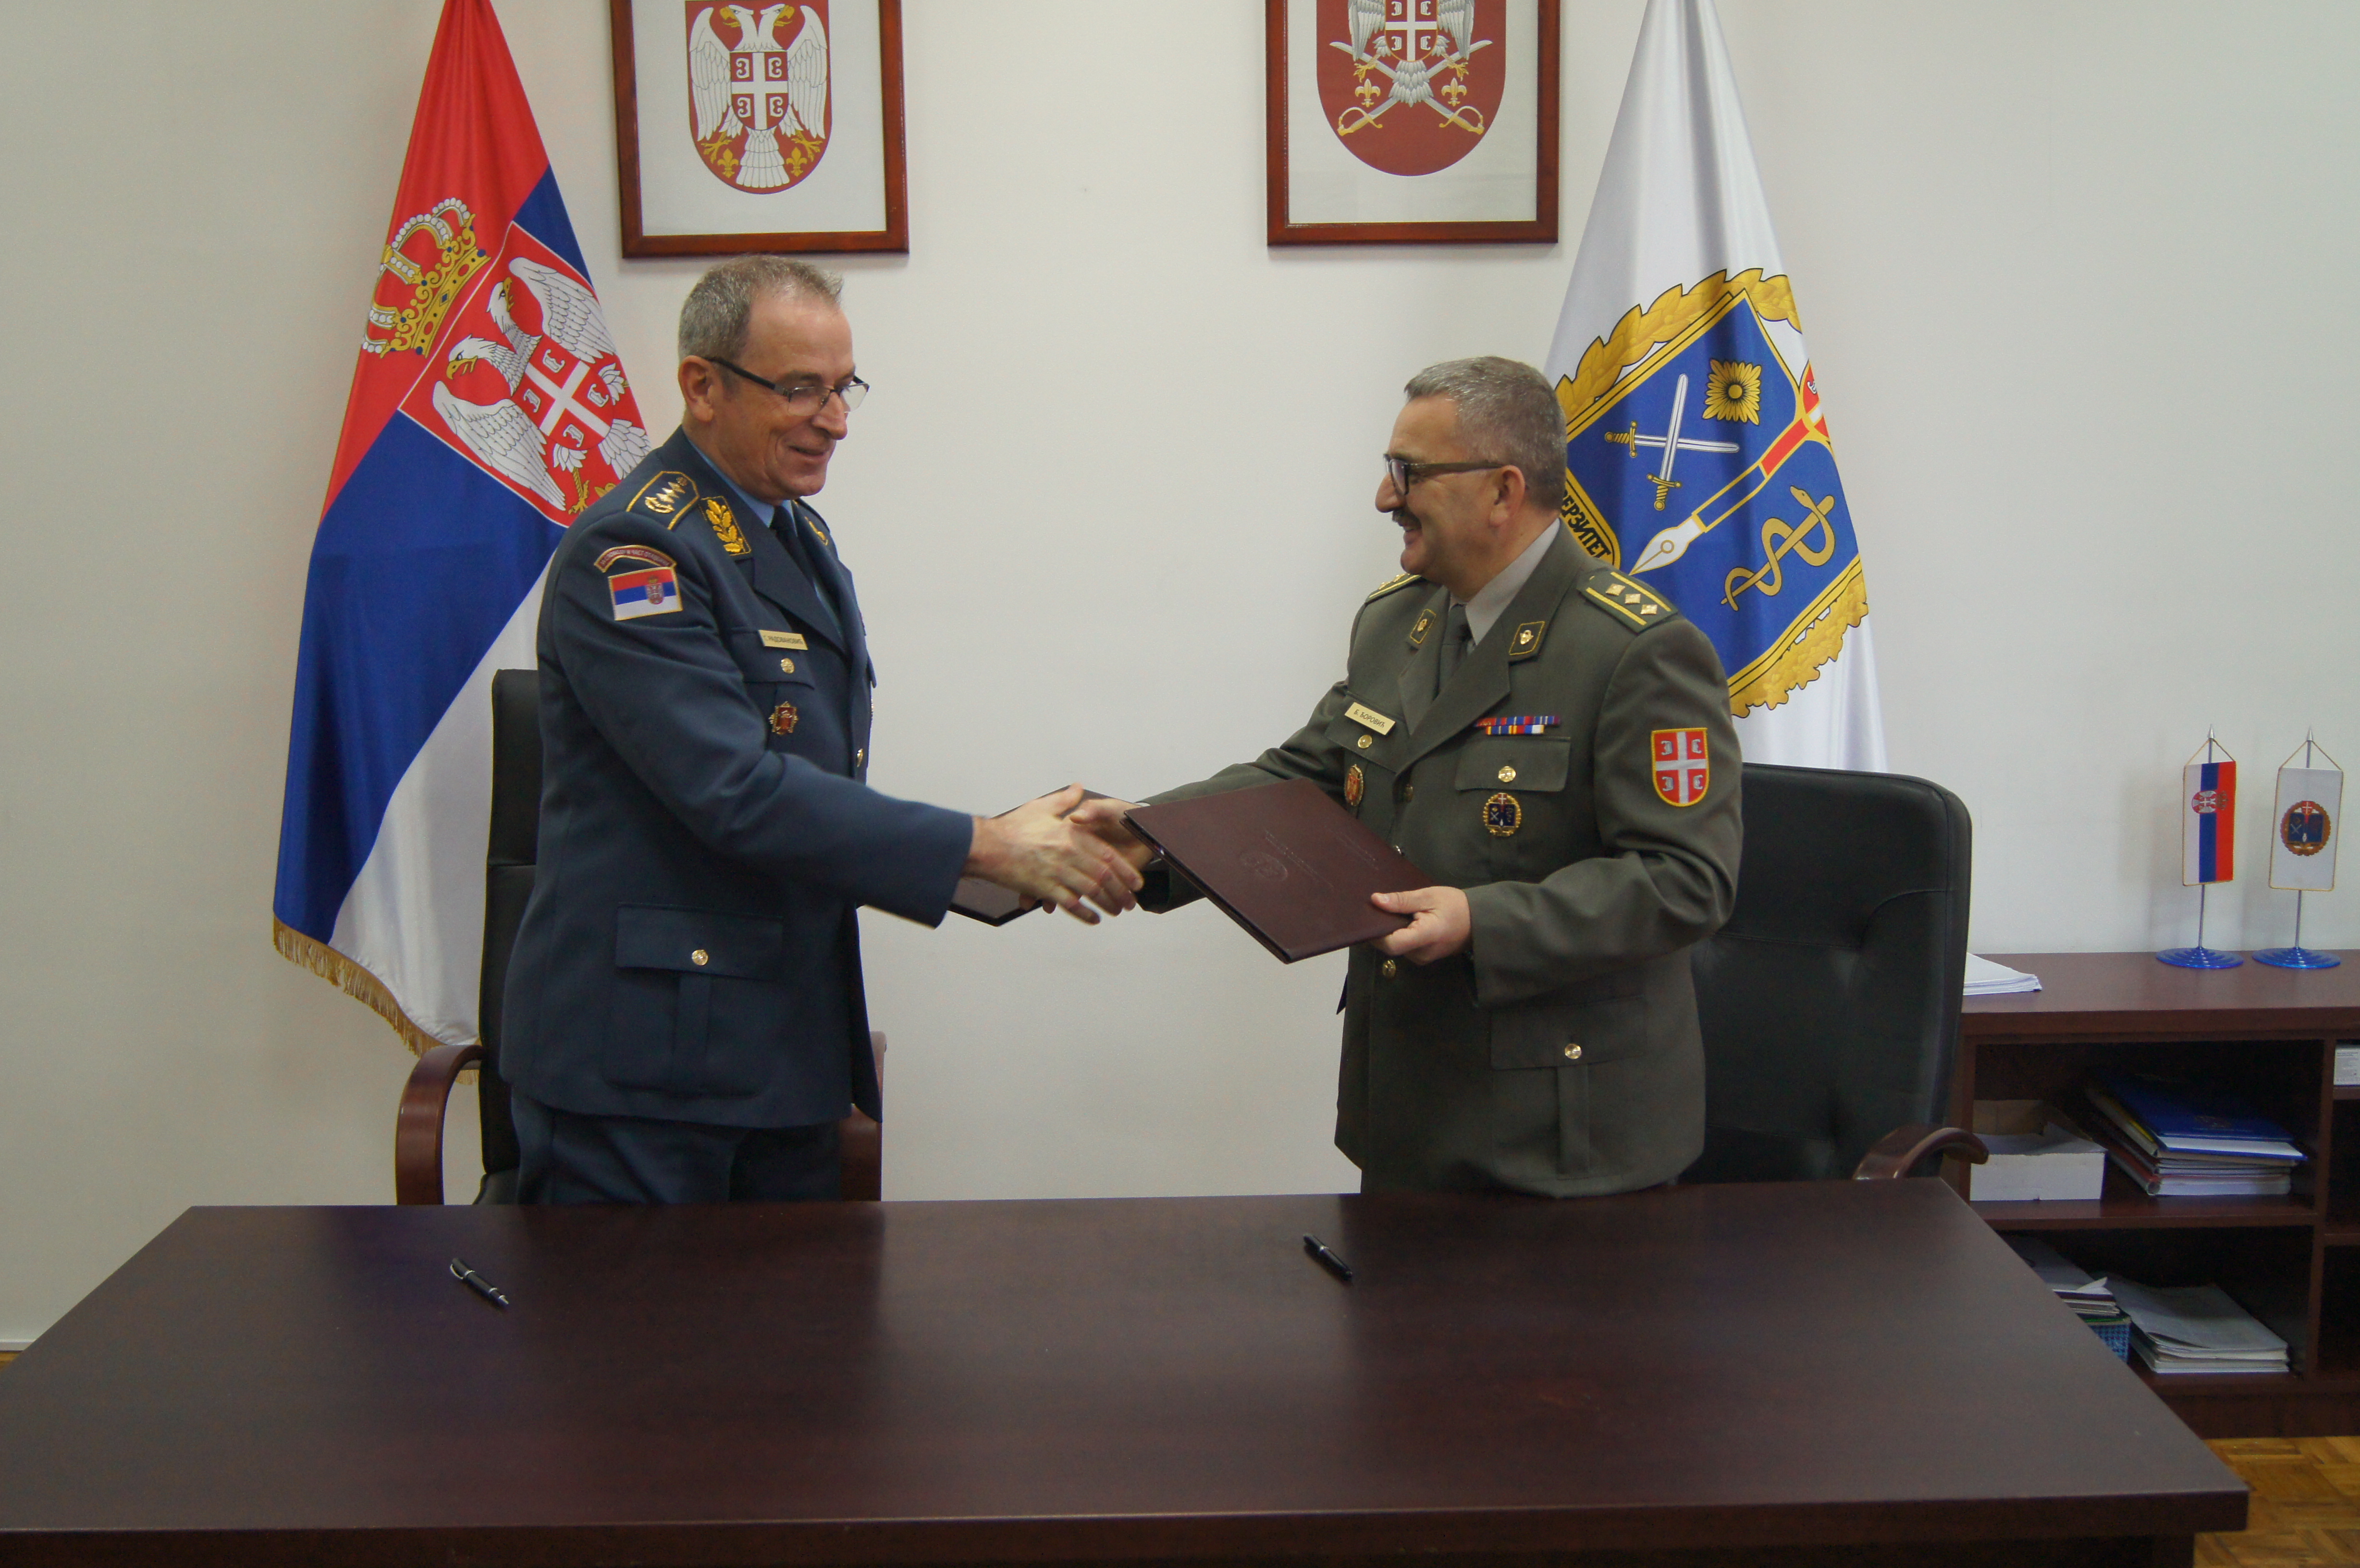 Handover of the Duties of the Rector of the University of Defence